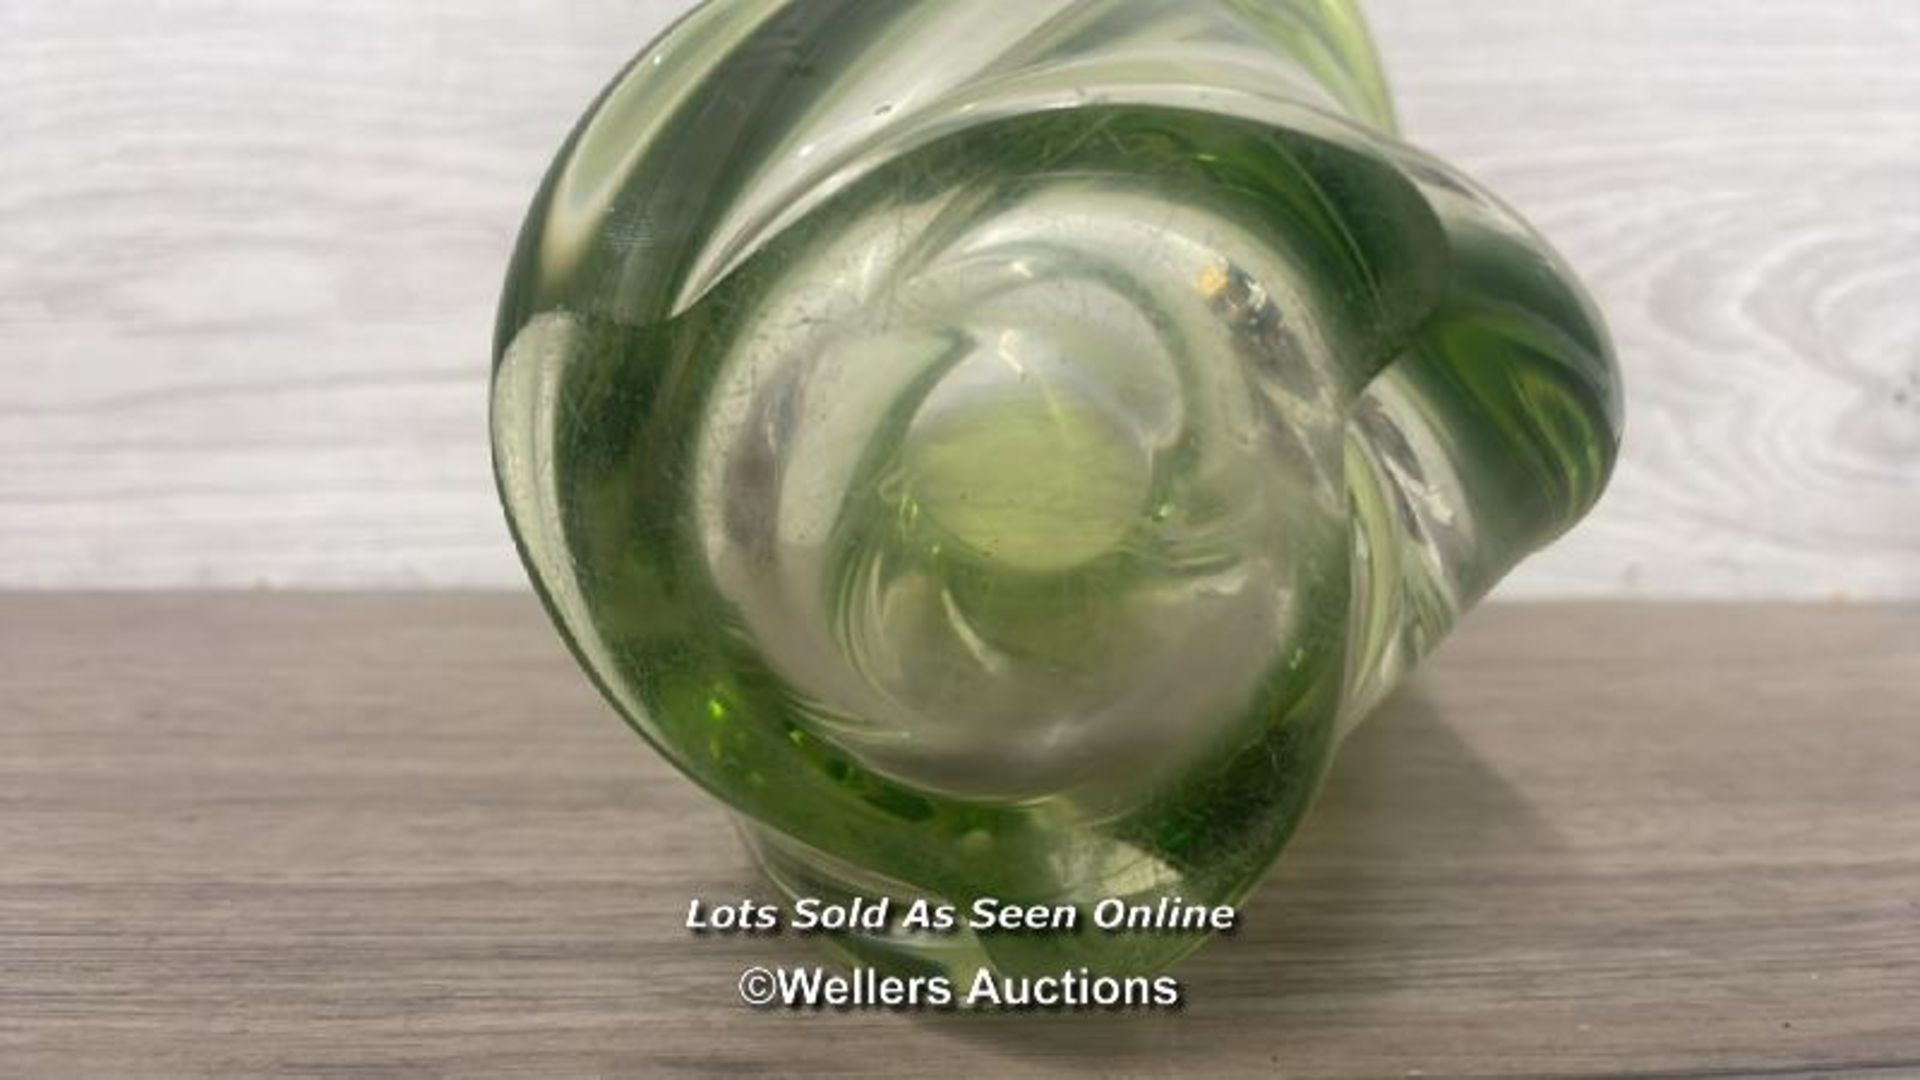 VAL SAINT LAMBERT HEAVY GREEN GLASS VASE OF TWISTED FORM, 18CM HIGH - Image 4 of 6